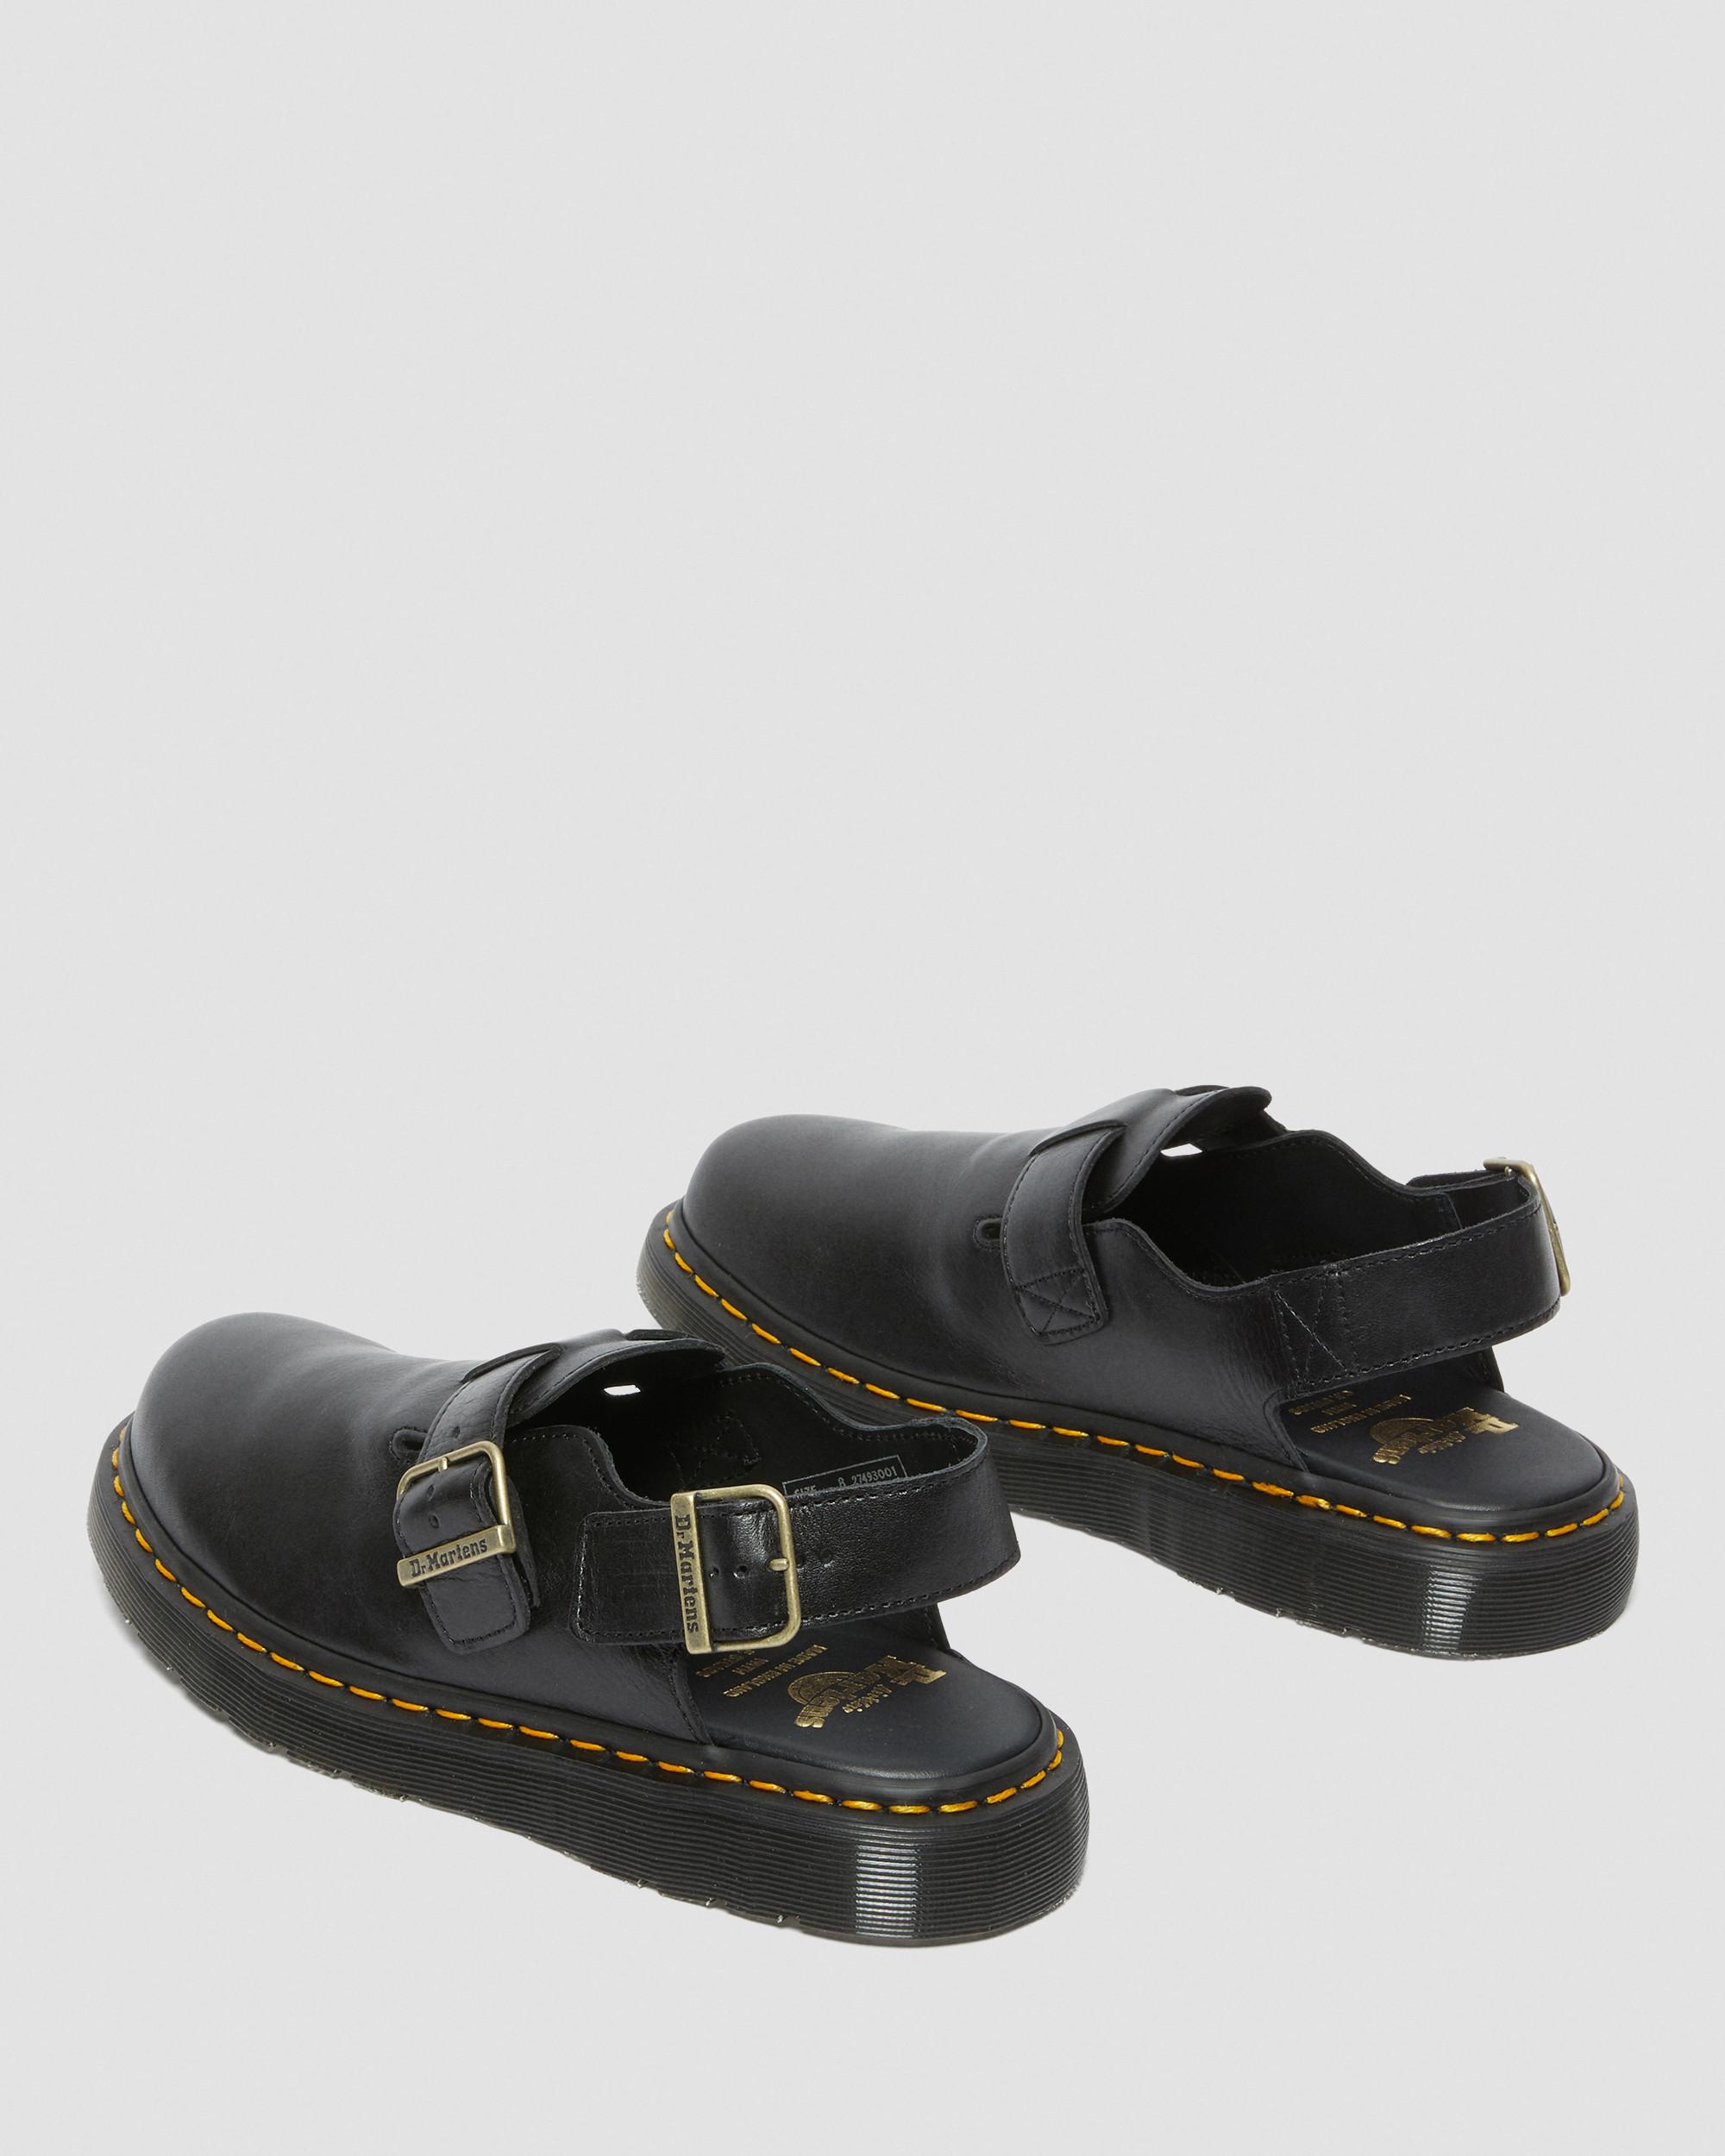 Jorge Made in England Leather Slingback SlidesJorge Made in England Leather Mules Dr. Martens